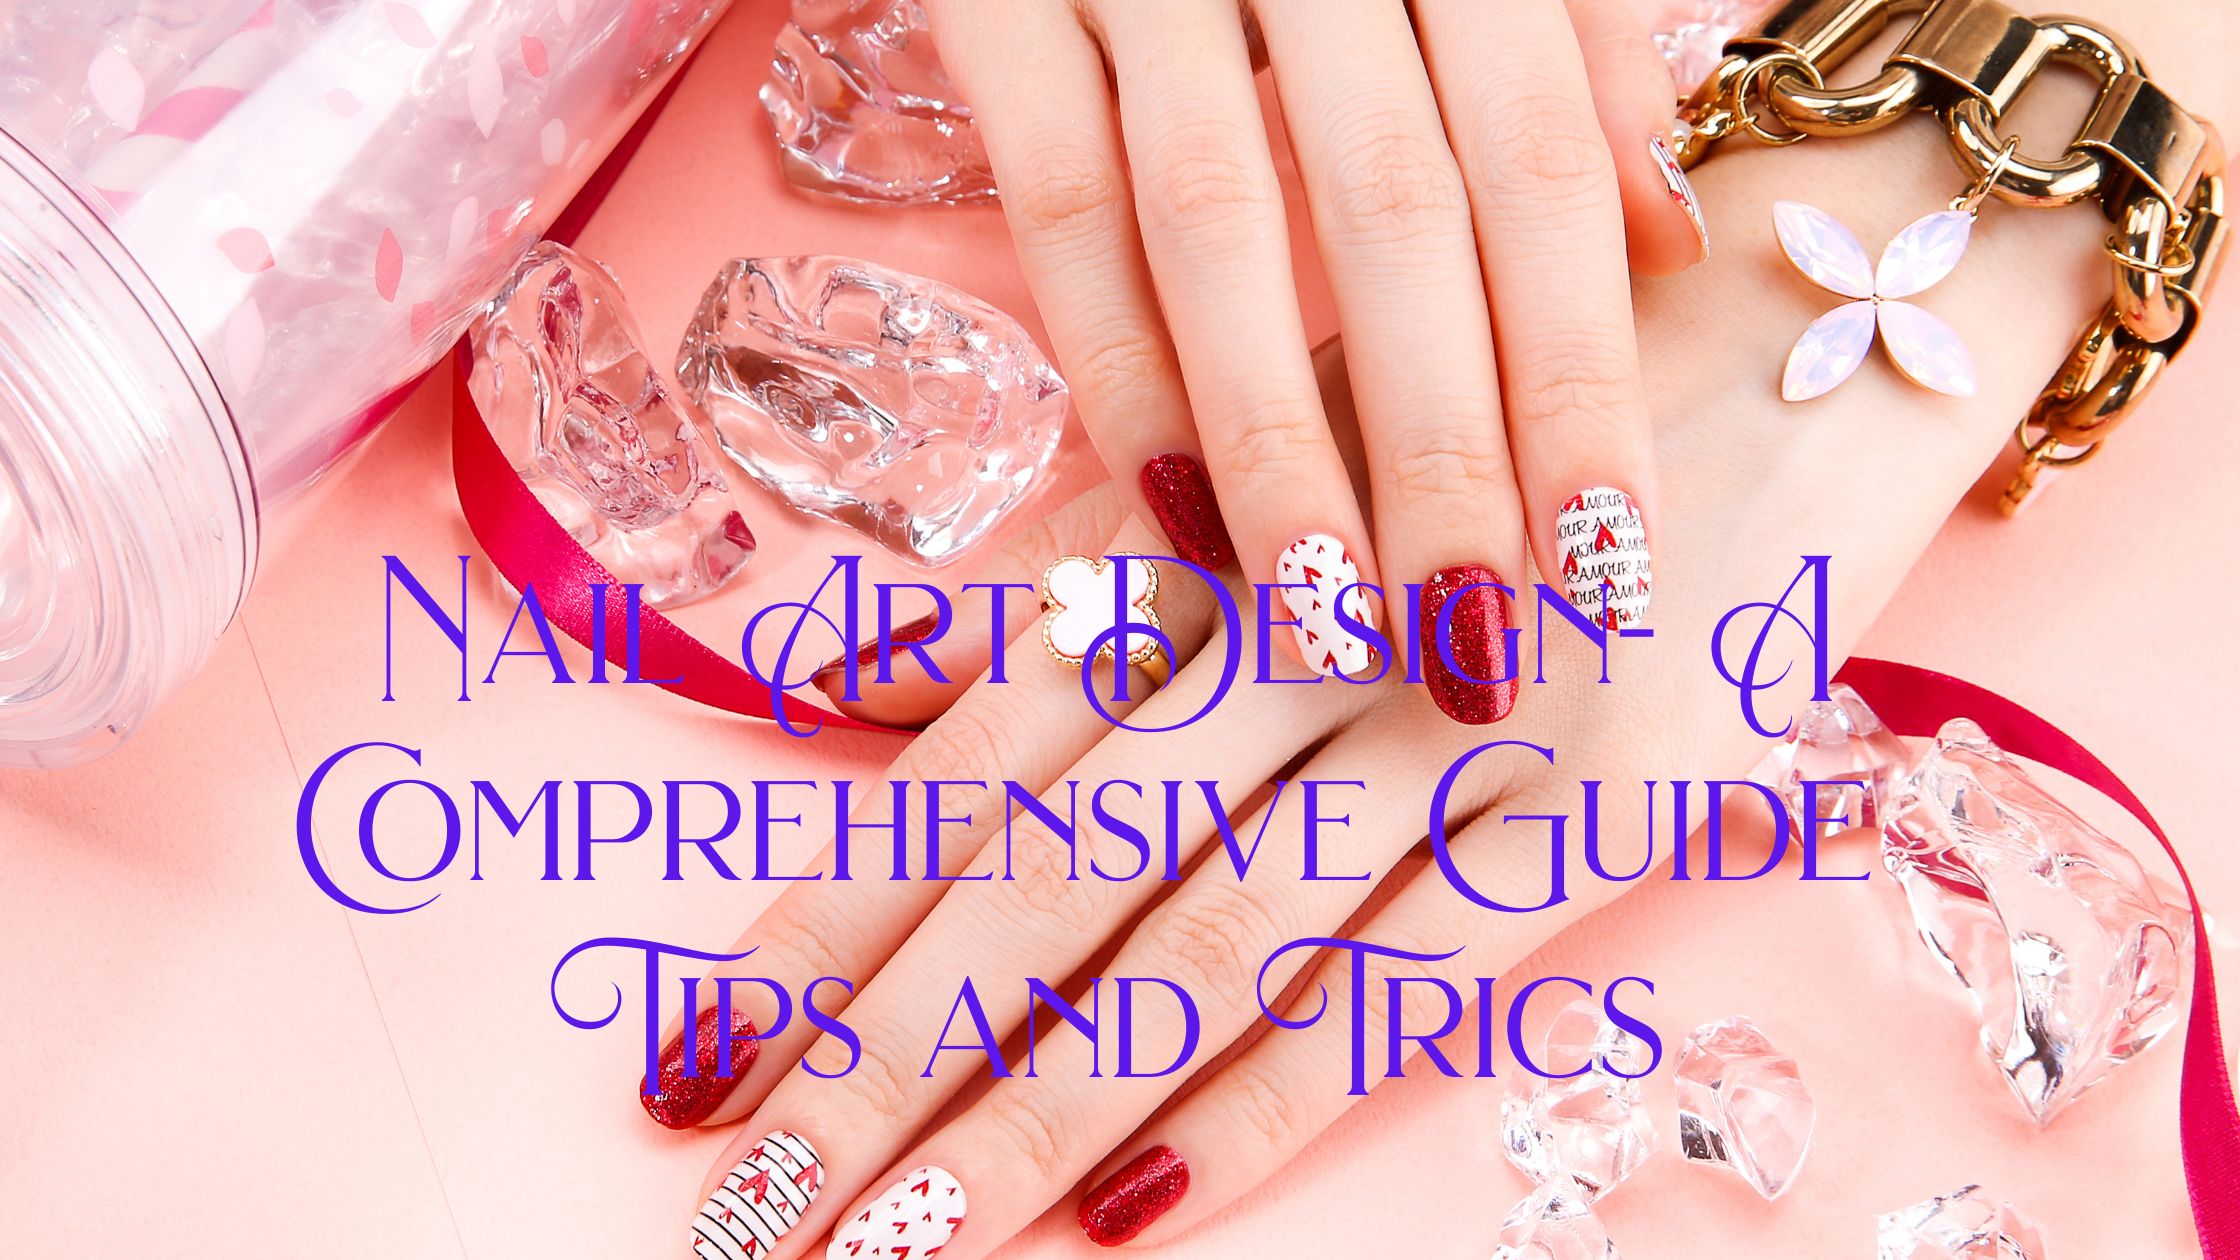 Nail Art Design- A Comprehensive Guide Tips and Trics